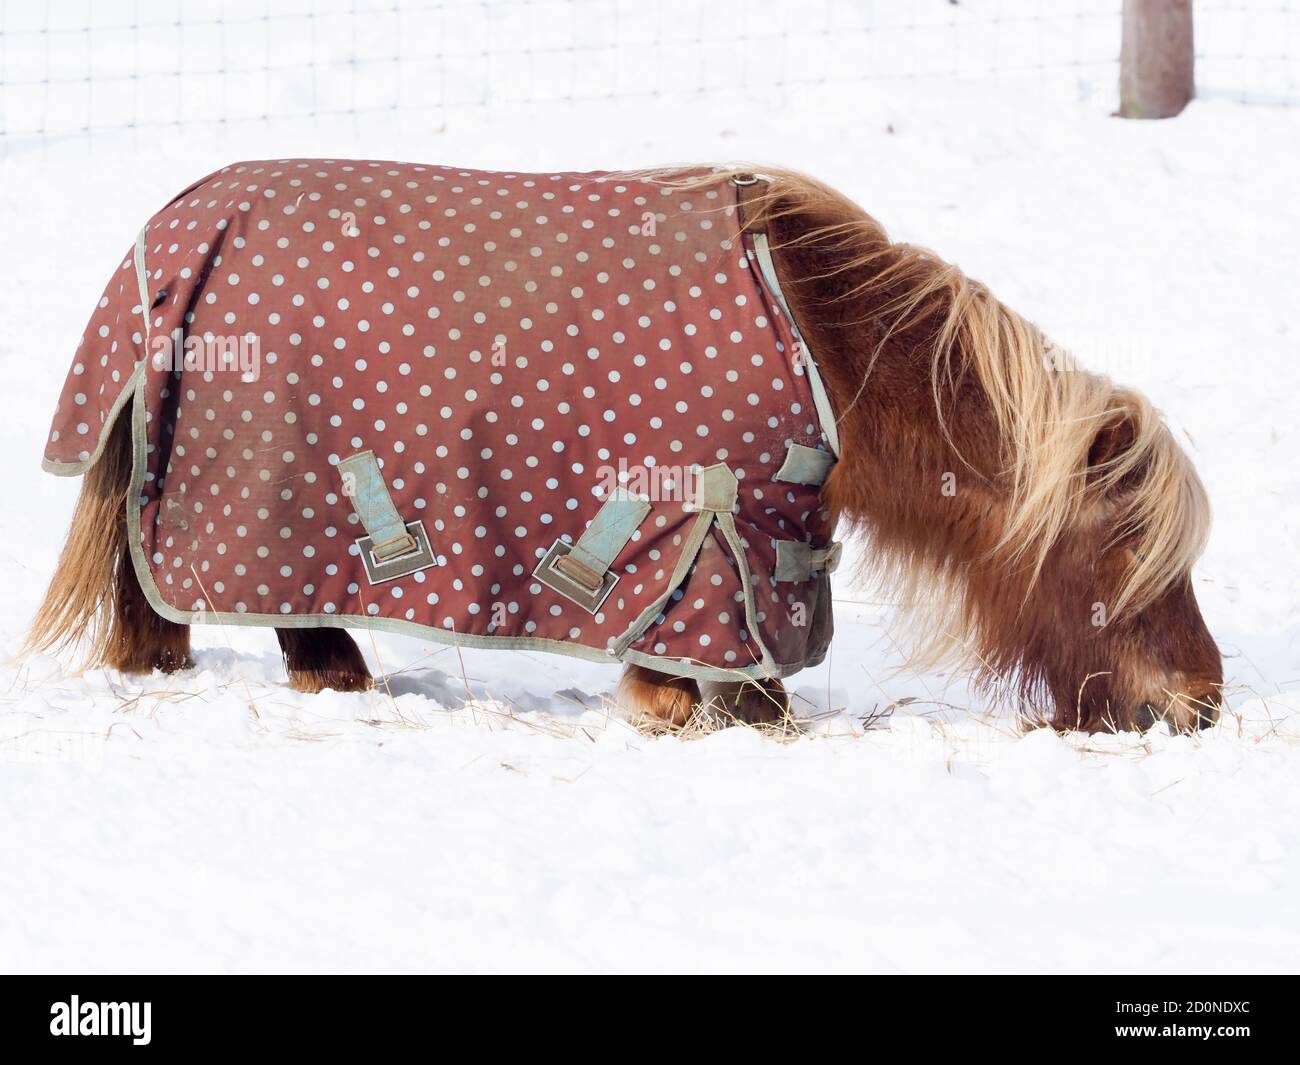 A Shetland pony in a rug stands in a field of deep snow. Stock Photo